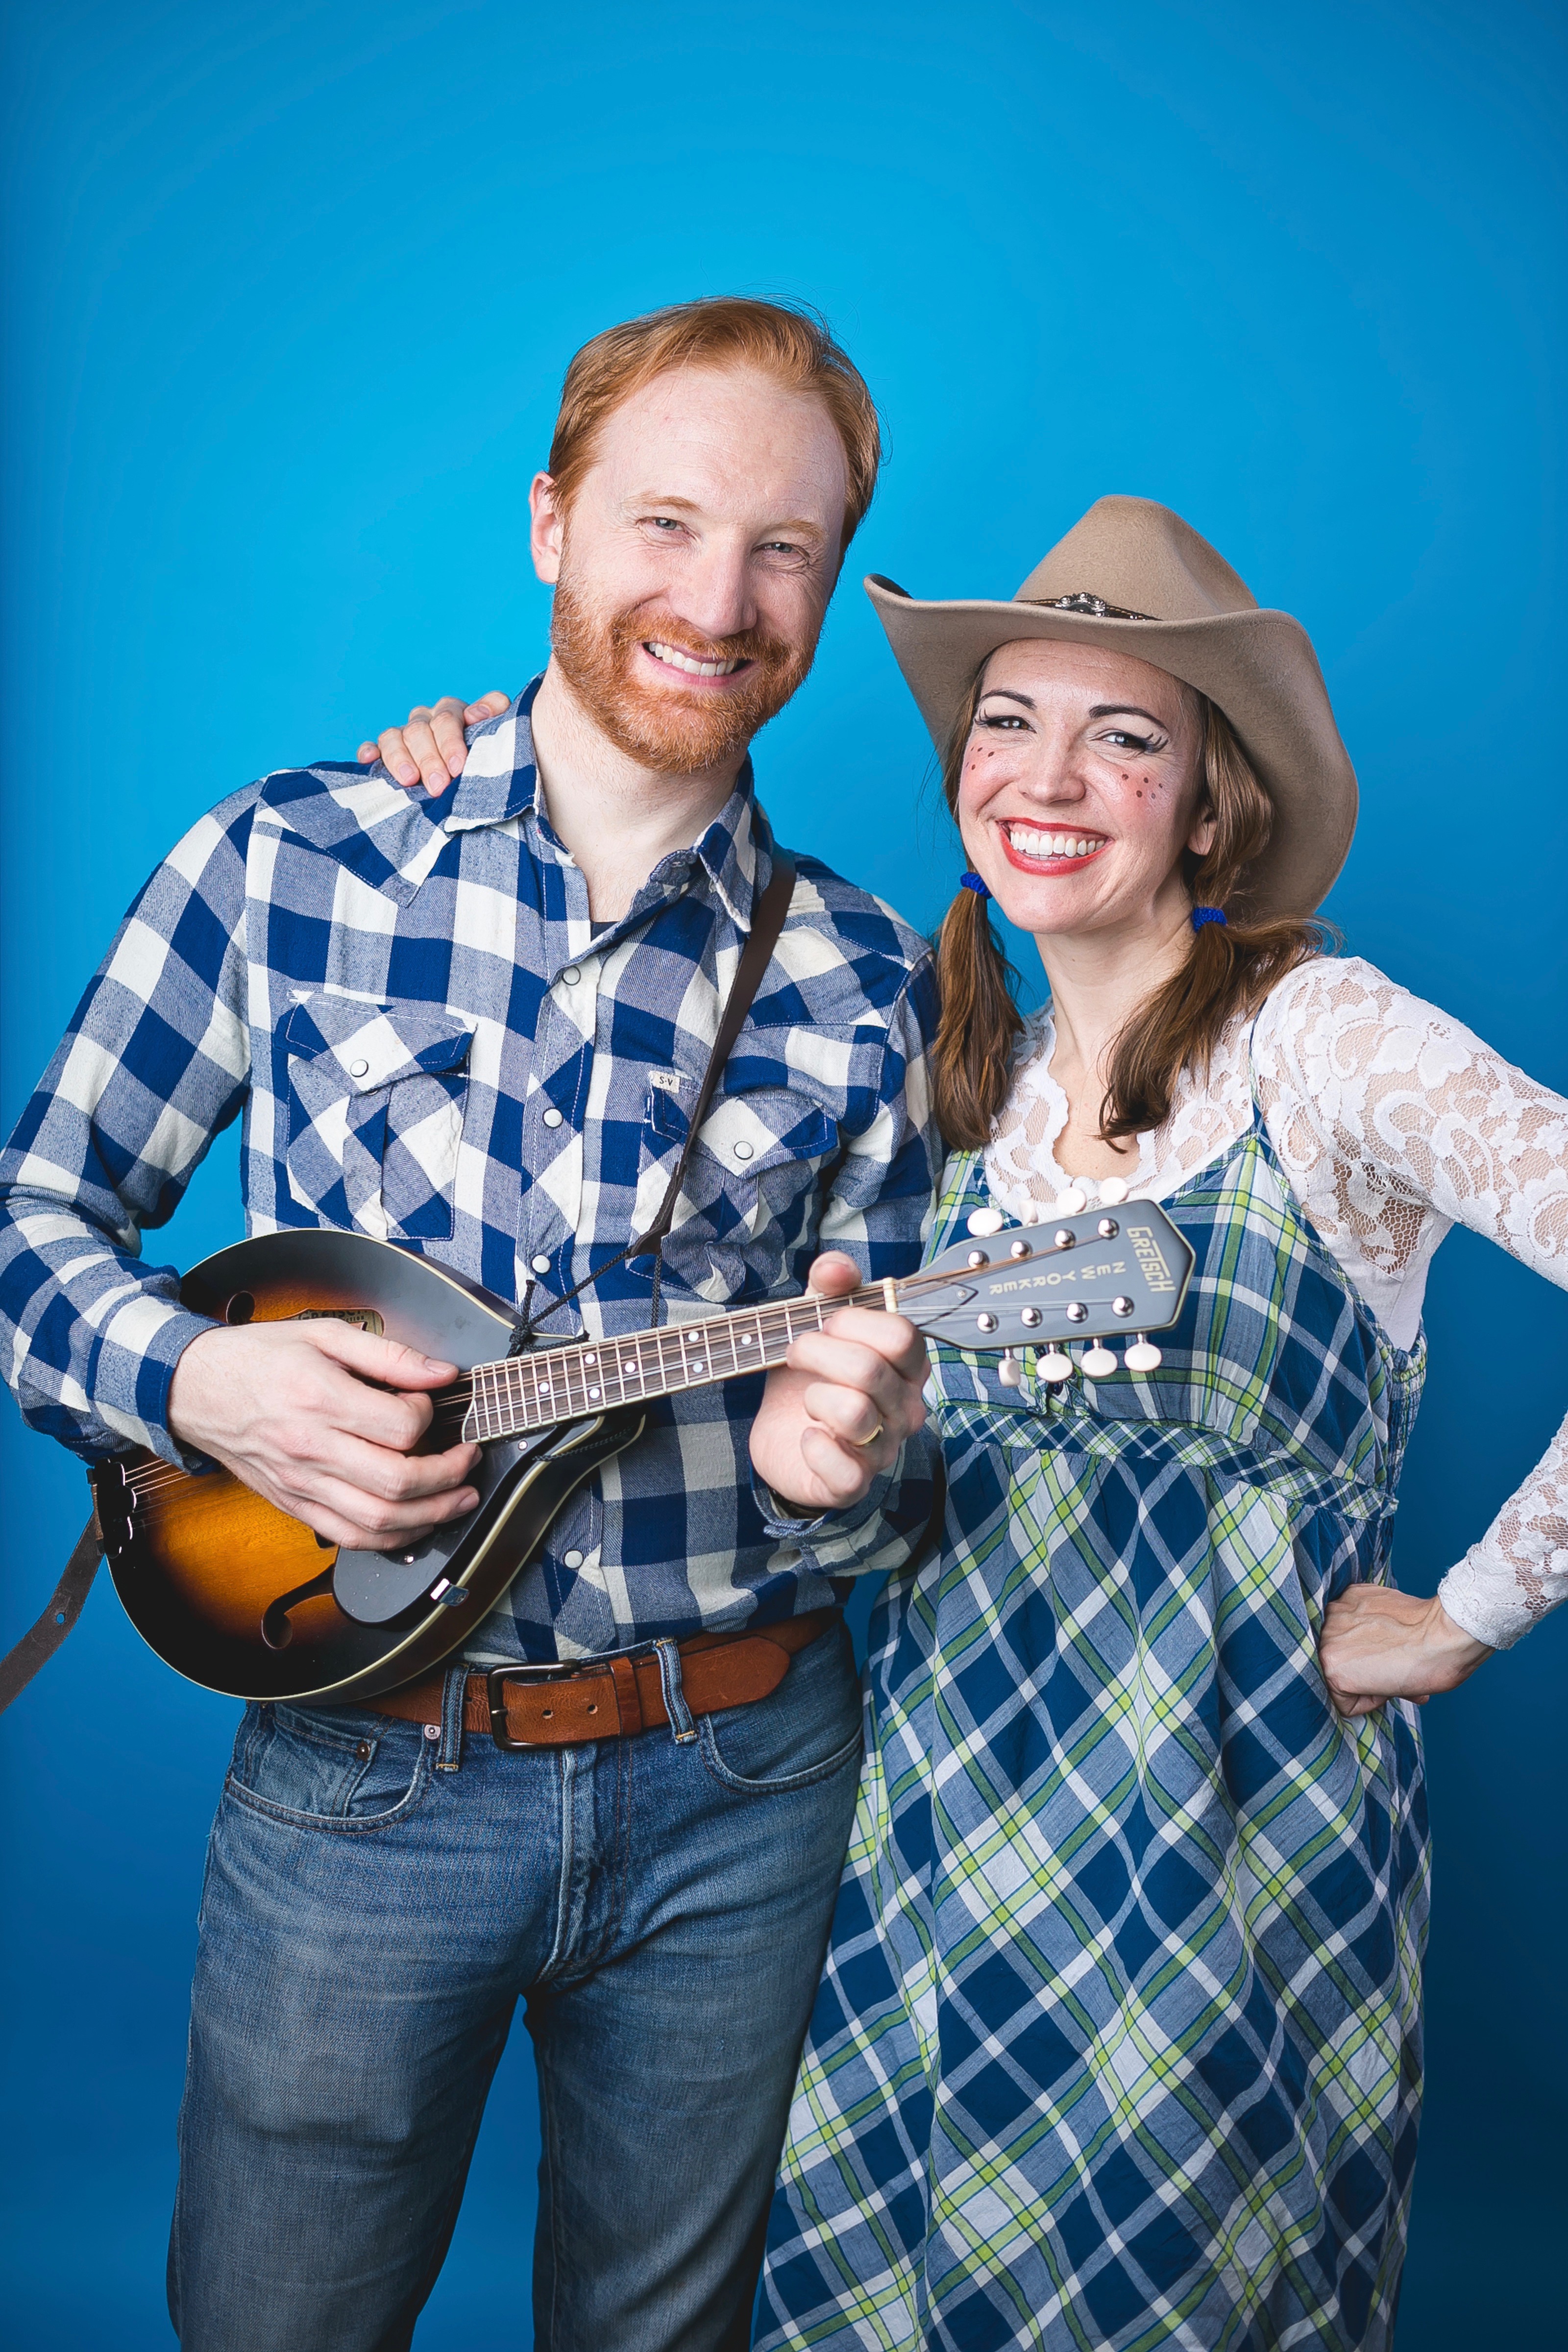 Erik in a plaid shirt holding a banjo and Miss Jamie in a plaid dress and cowboy hat